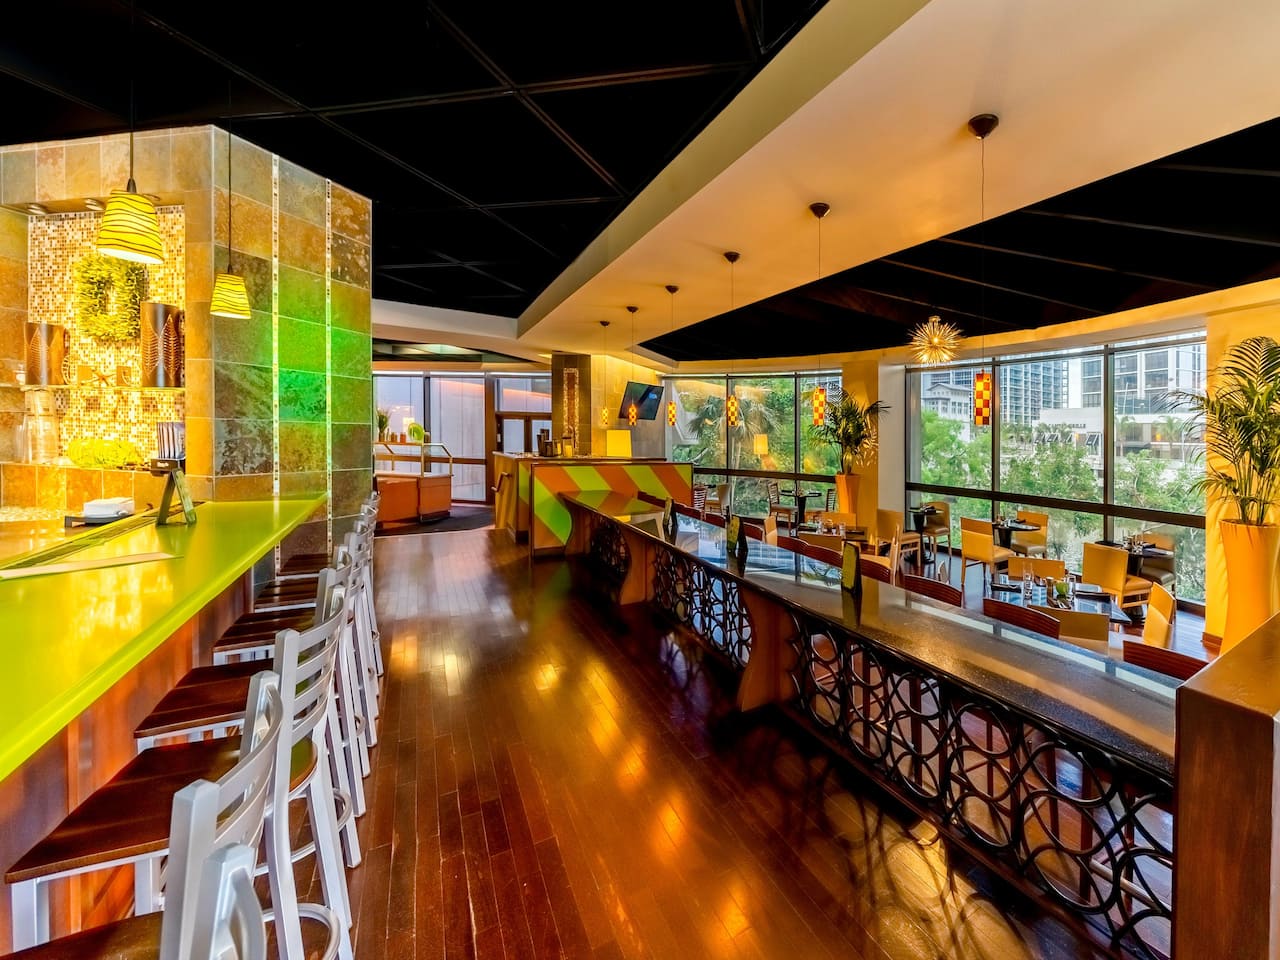 Restaurant seating and decor at Riverview Bar & Grill in downtown Miami